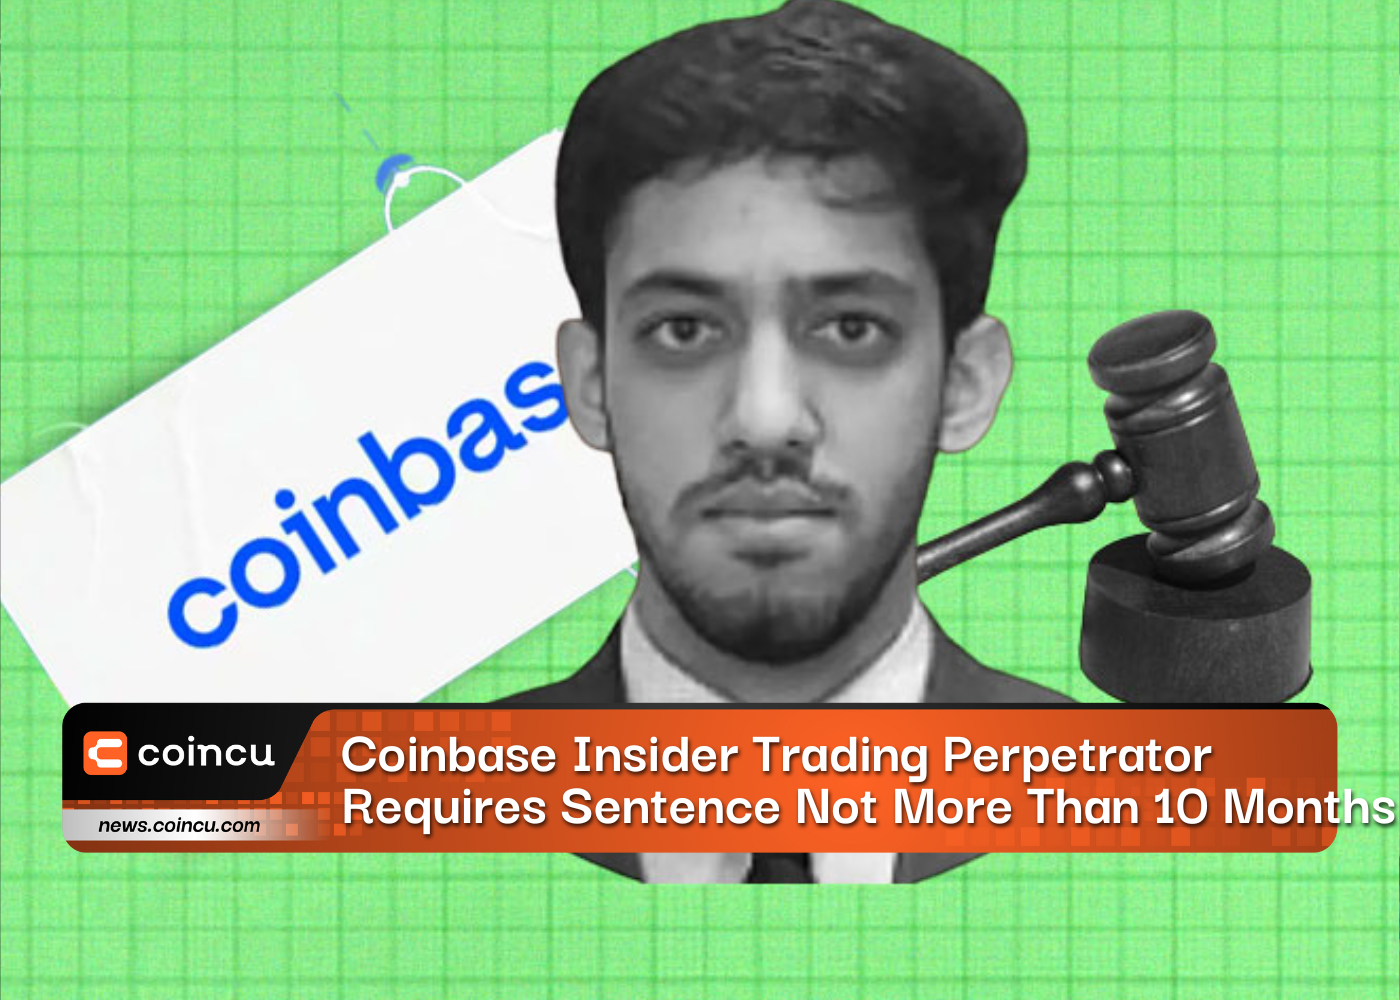 Coinbase Insider Trading Perpetrator Requires Sentence Not More Than 10 Months